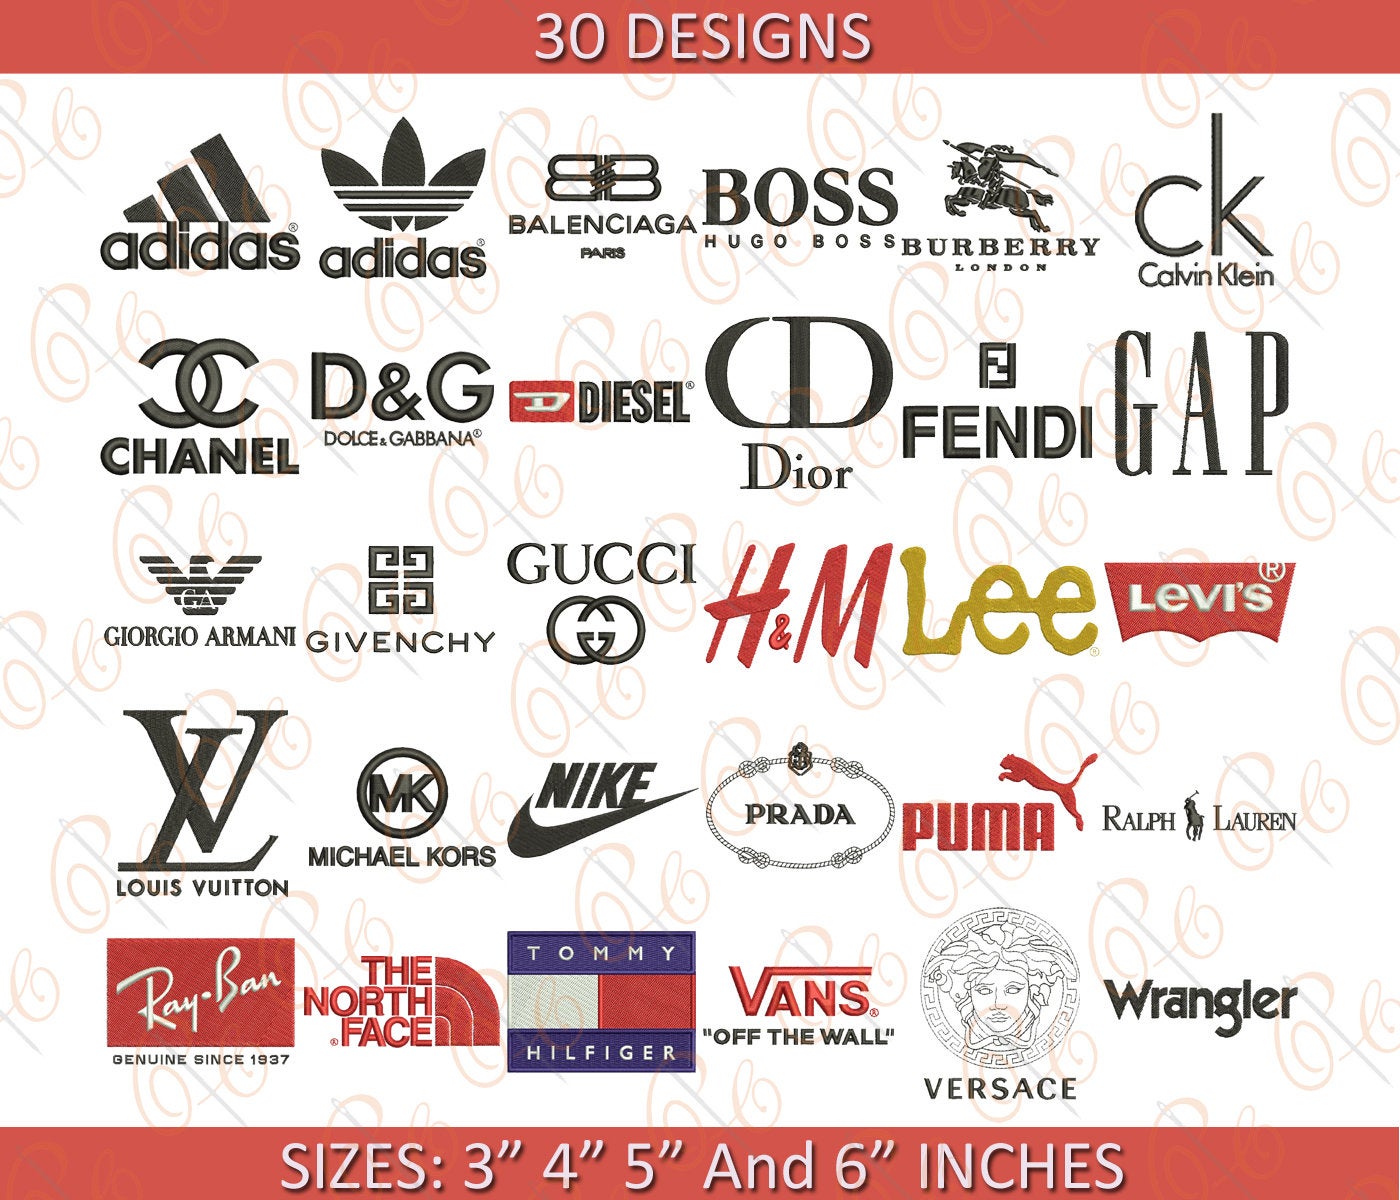 Fashion Brands Street Sign Embroidery Designs